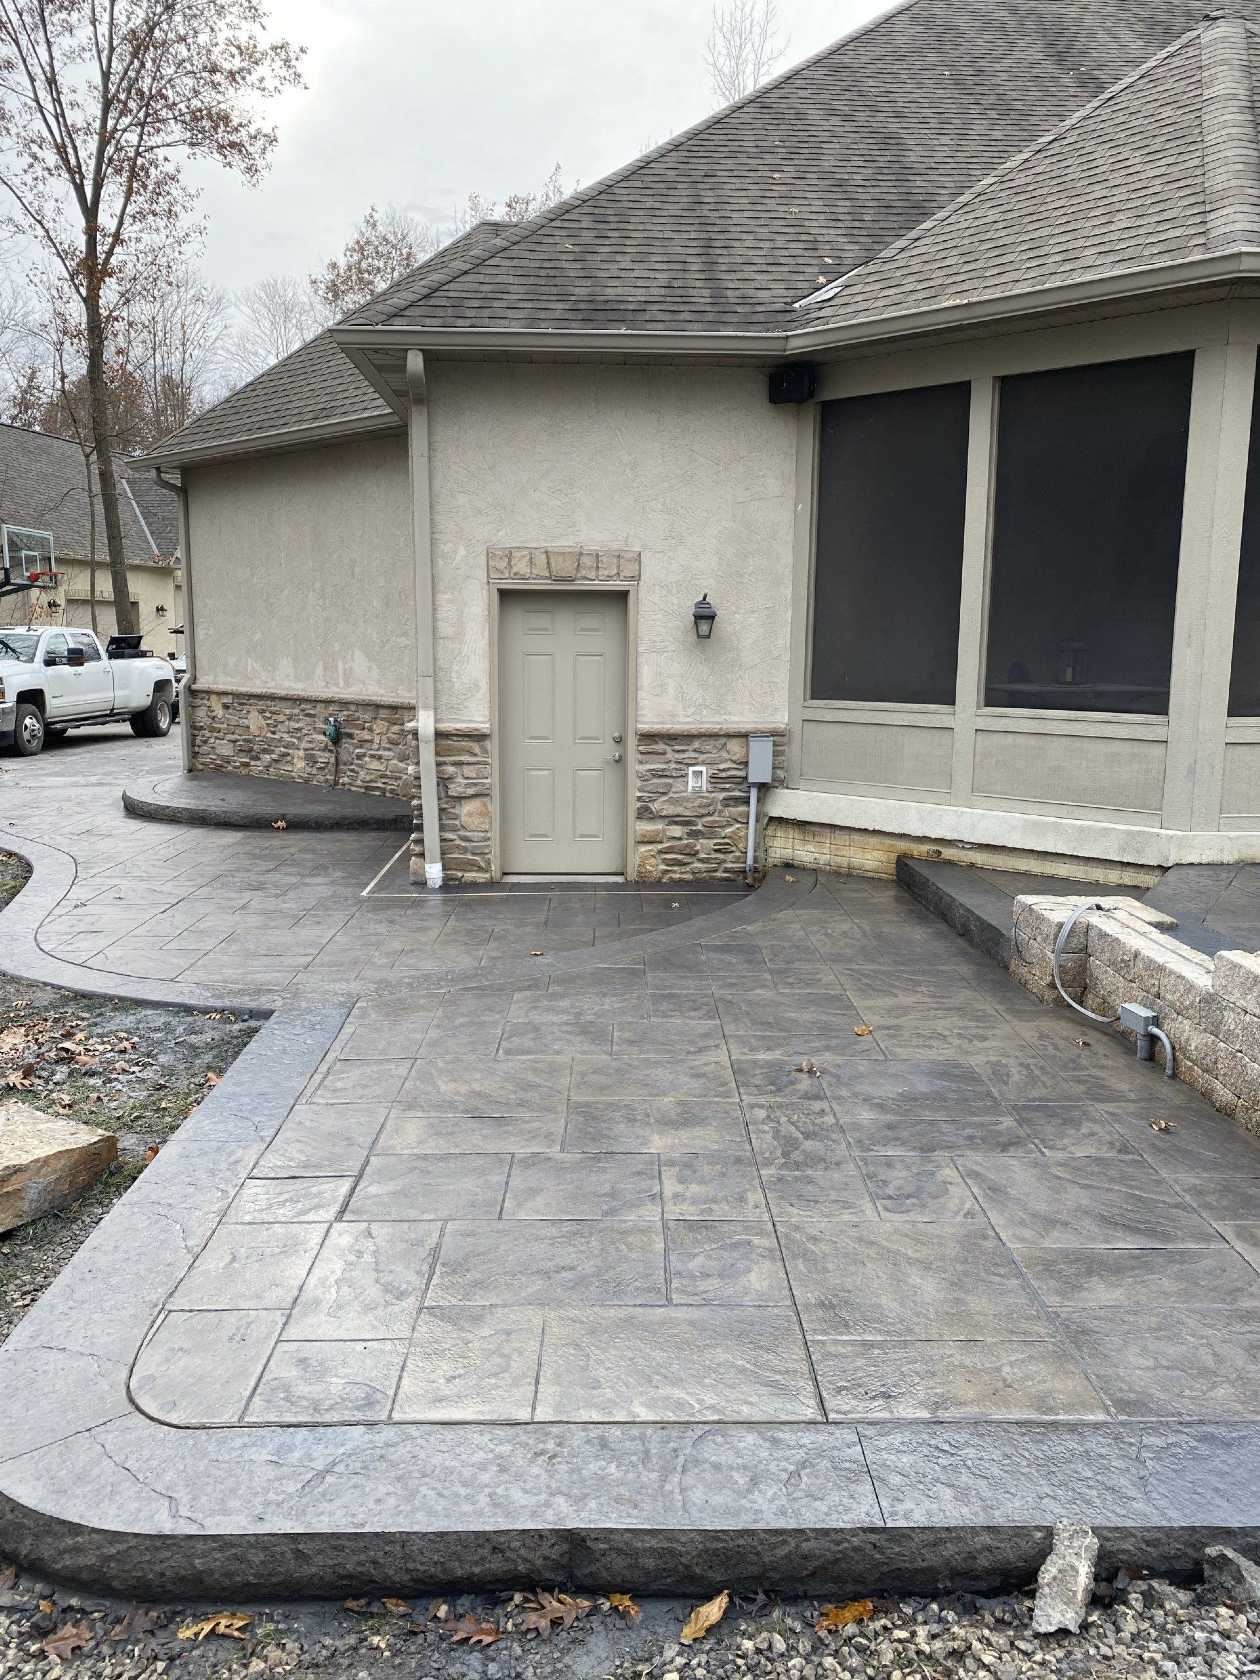 A side patio of a home made of stamped concrete.